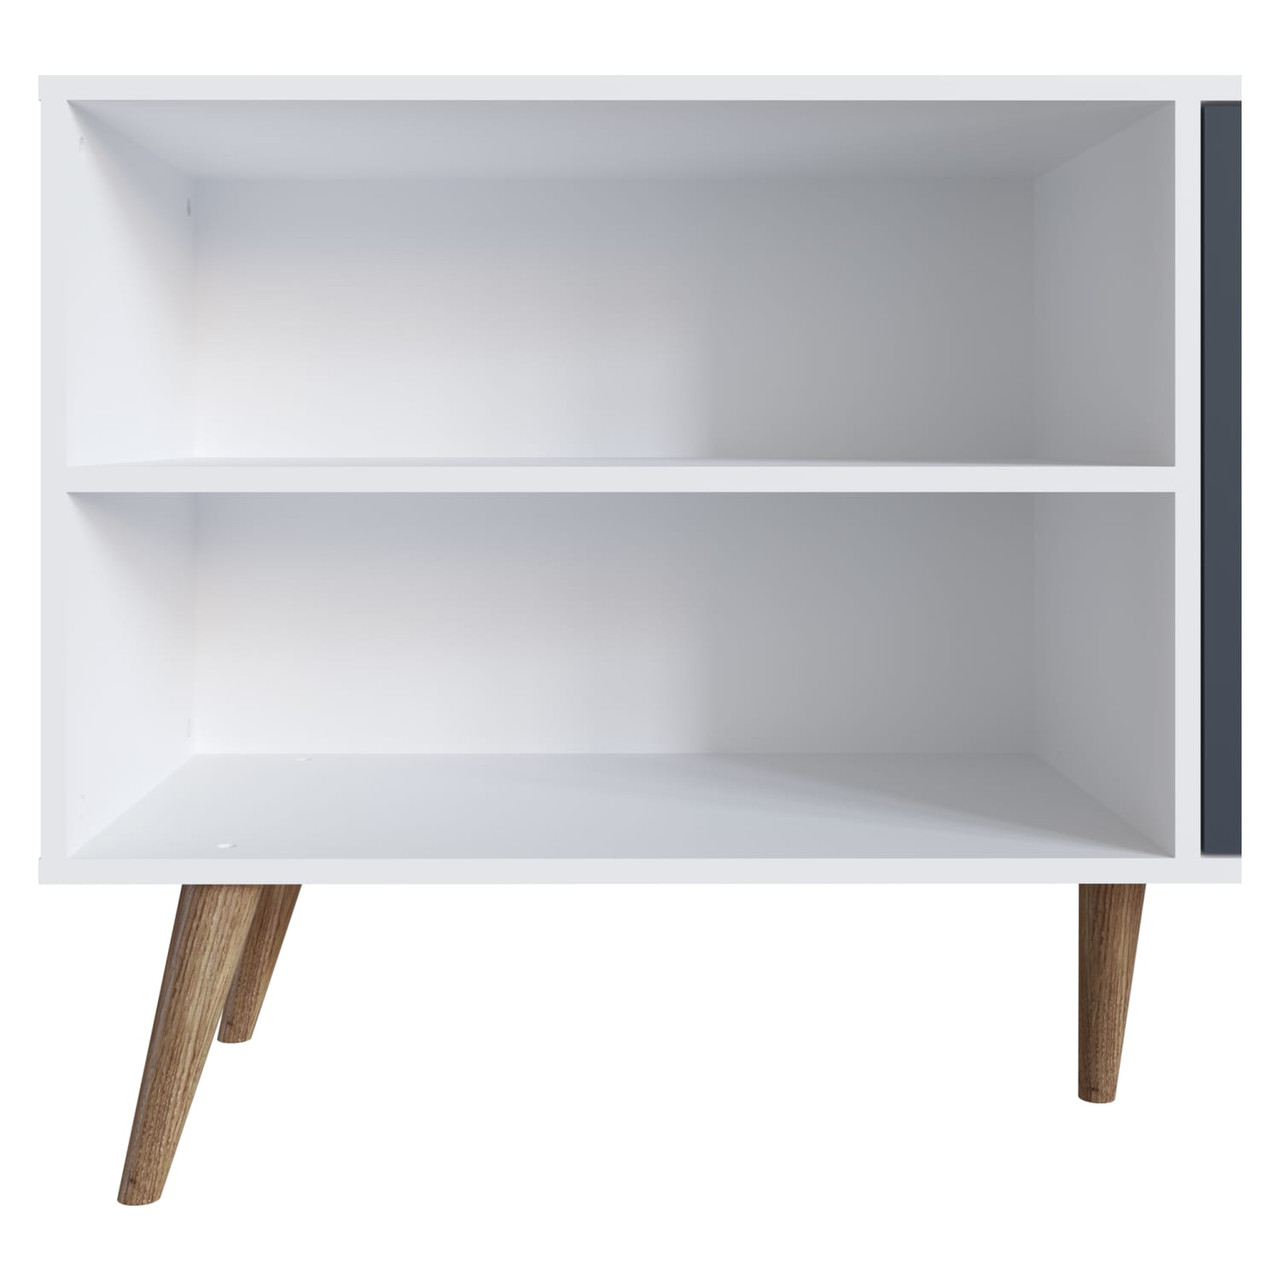 Amber 53.7” TV Stand with Faux Leather Handles in White and Blue